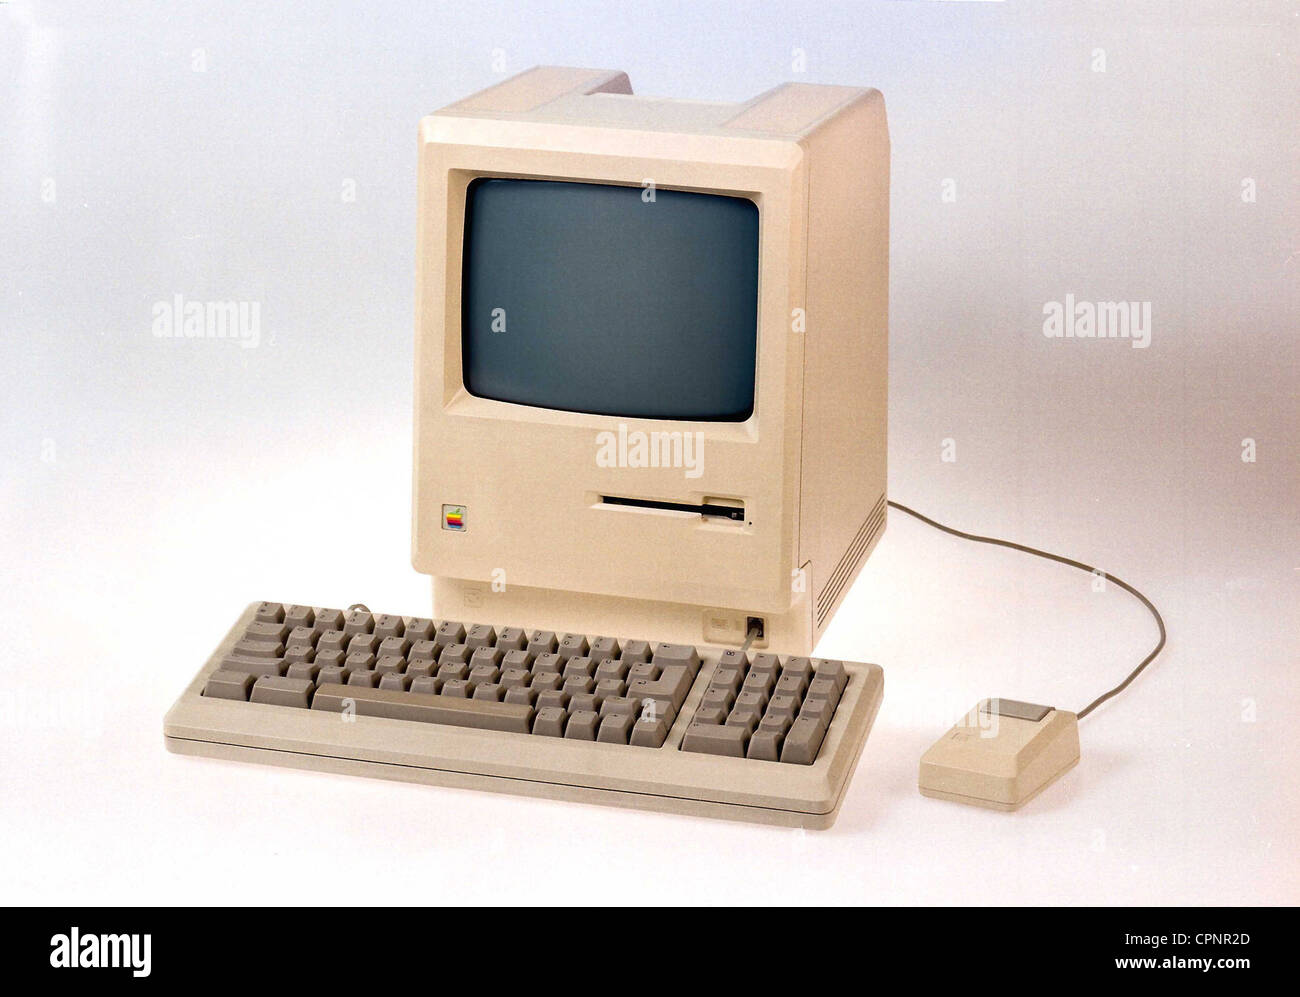 computing / electronics, computer, Apple Macintosh Plus, personal computer, 1 megabyte random access memory, 8 megahertz, with built-in b/w monitor and 3.5 inch floppy disk drive, original price 1986: 2.600 dollar, produced until October 1990, USA, 1986, keyboard, keyboards, mouse, mice, follow-up model of the legendary Mac, design classics, design, history of computer, computer engineering, 80s, EDP, IT, hardware, still, studio shot, object, objects, compact system, compact, follower, followers, 1980s, 20th century, historic, historical, Additional-Rights-Clearences-Not Available Stock Photo